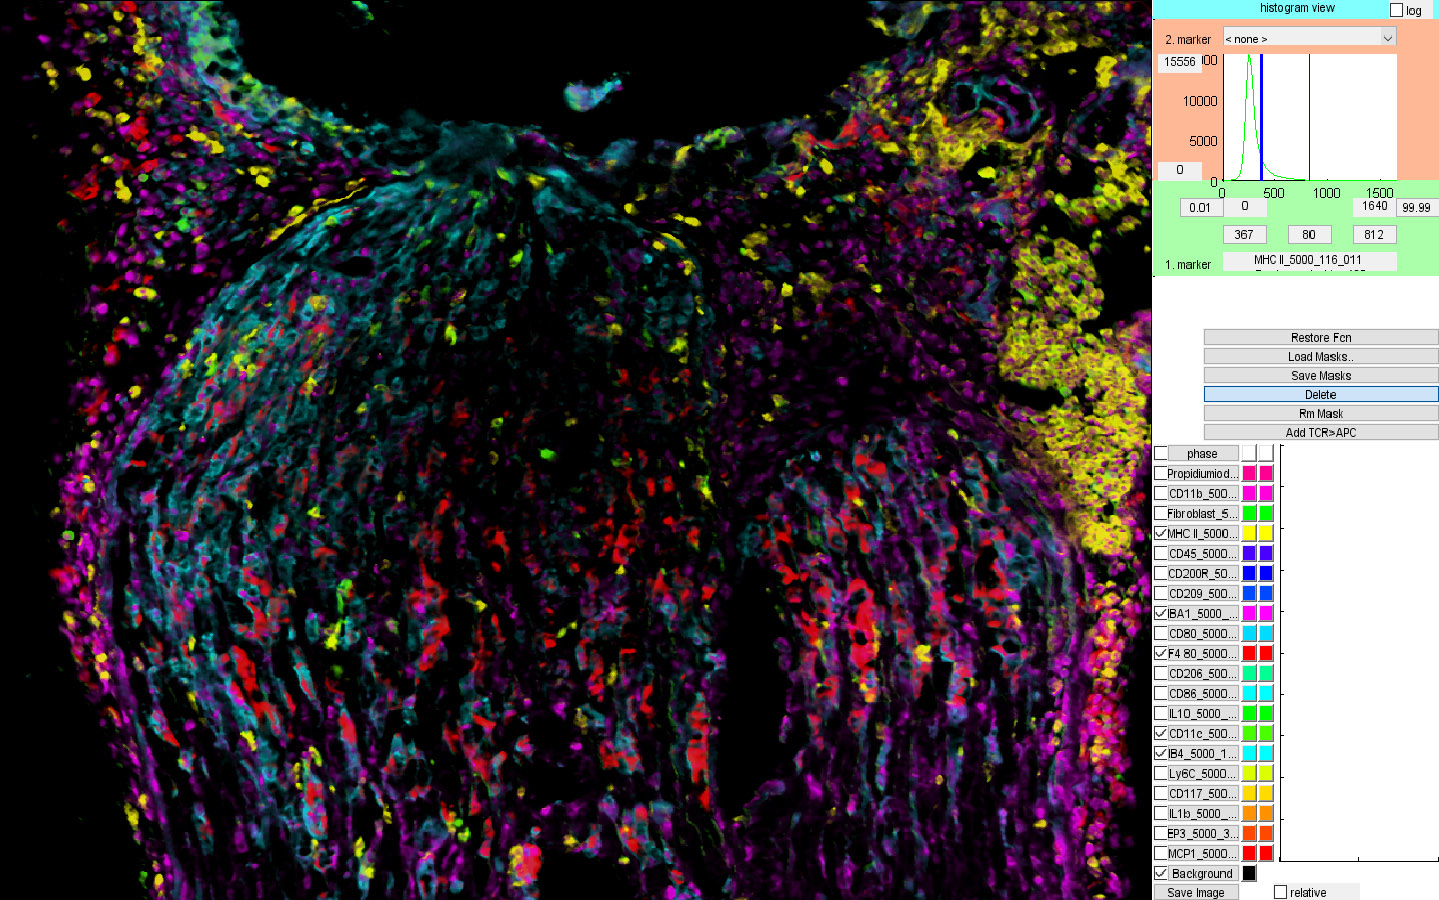 Fluorescence image of a variety of immune cells at work repairing the injured sciatic nerve.